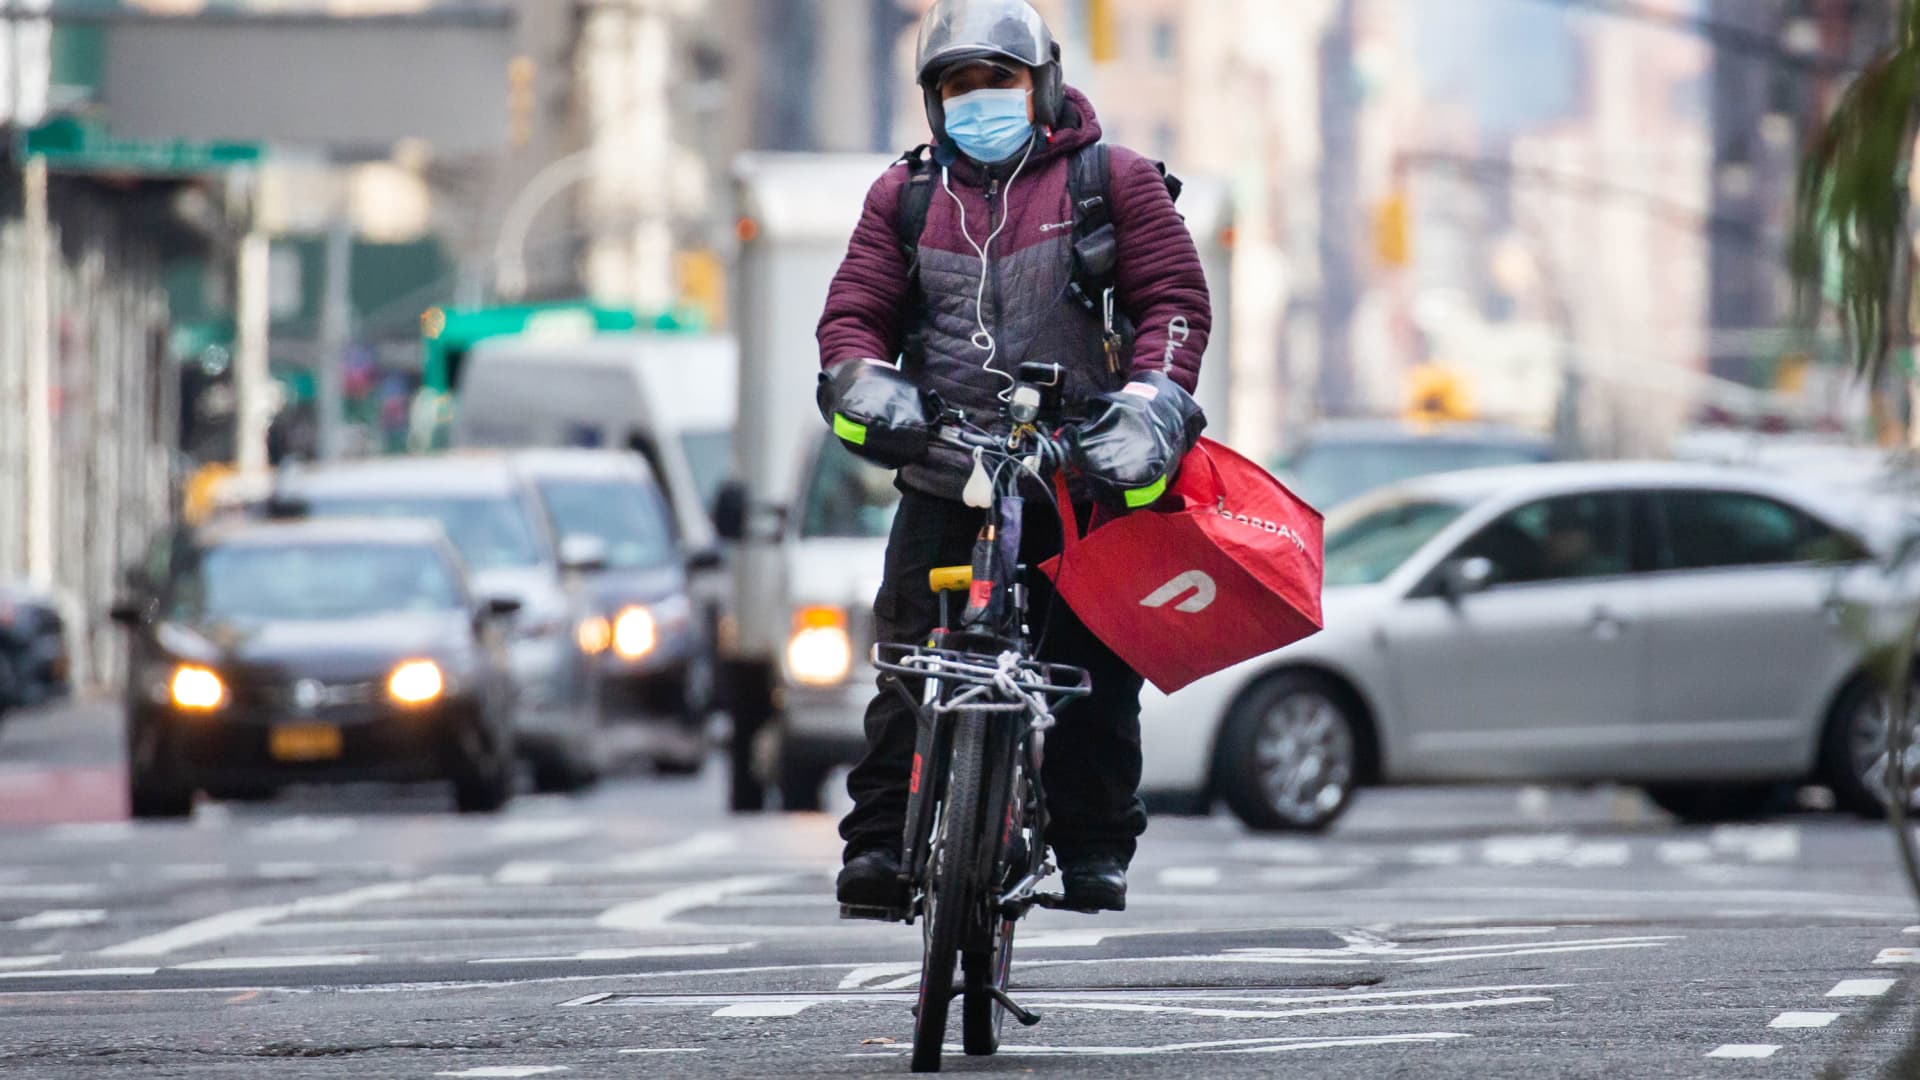 A bike messenger carries a DoorDash bag during a delivery in New York, Wednesday, Dec. 9, 2020.